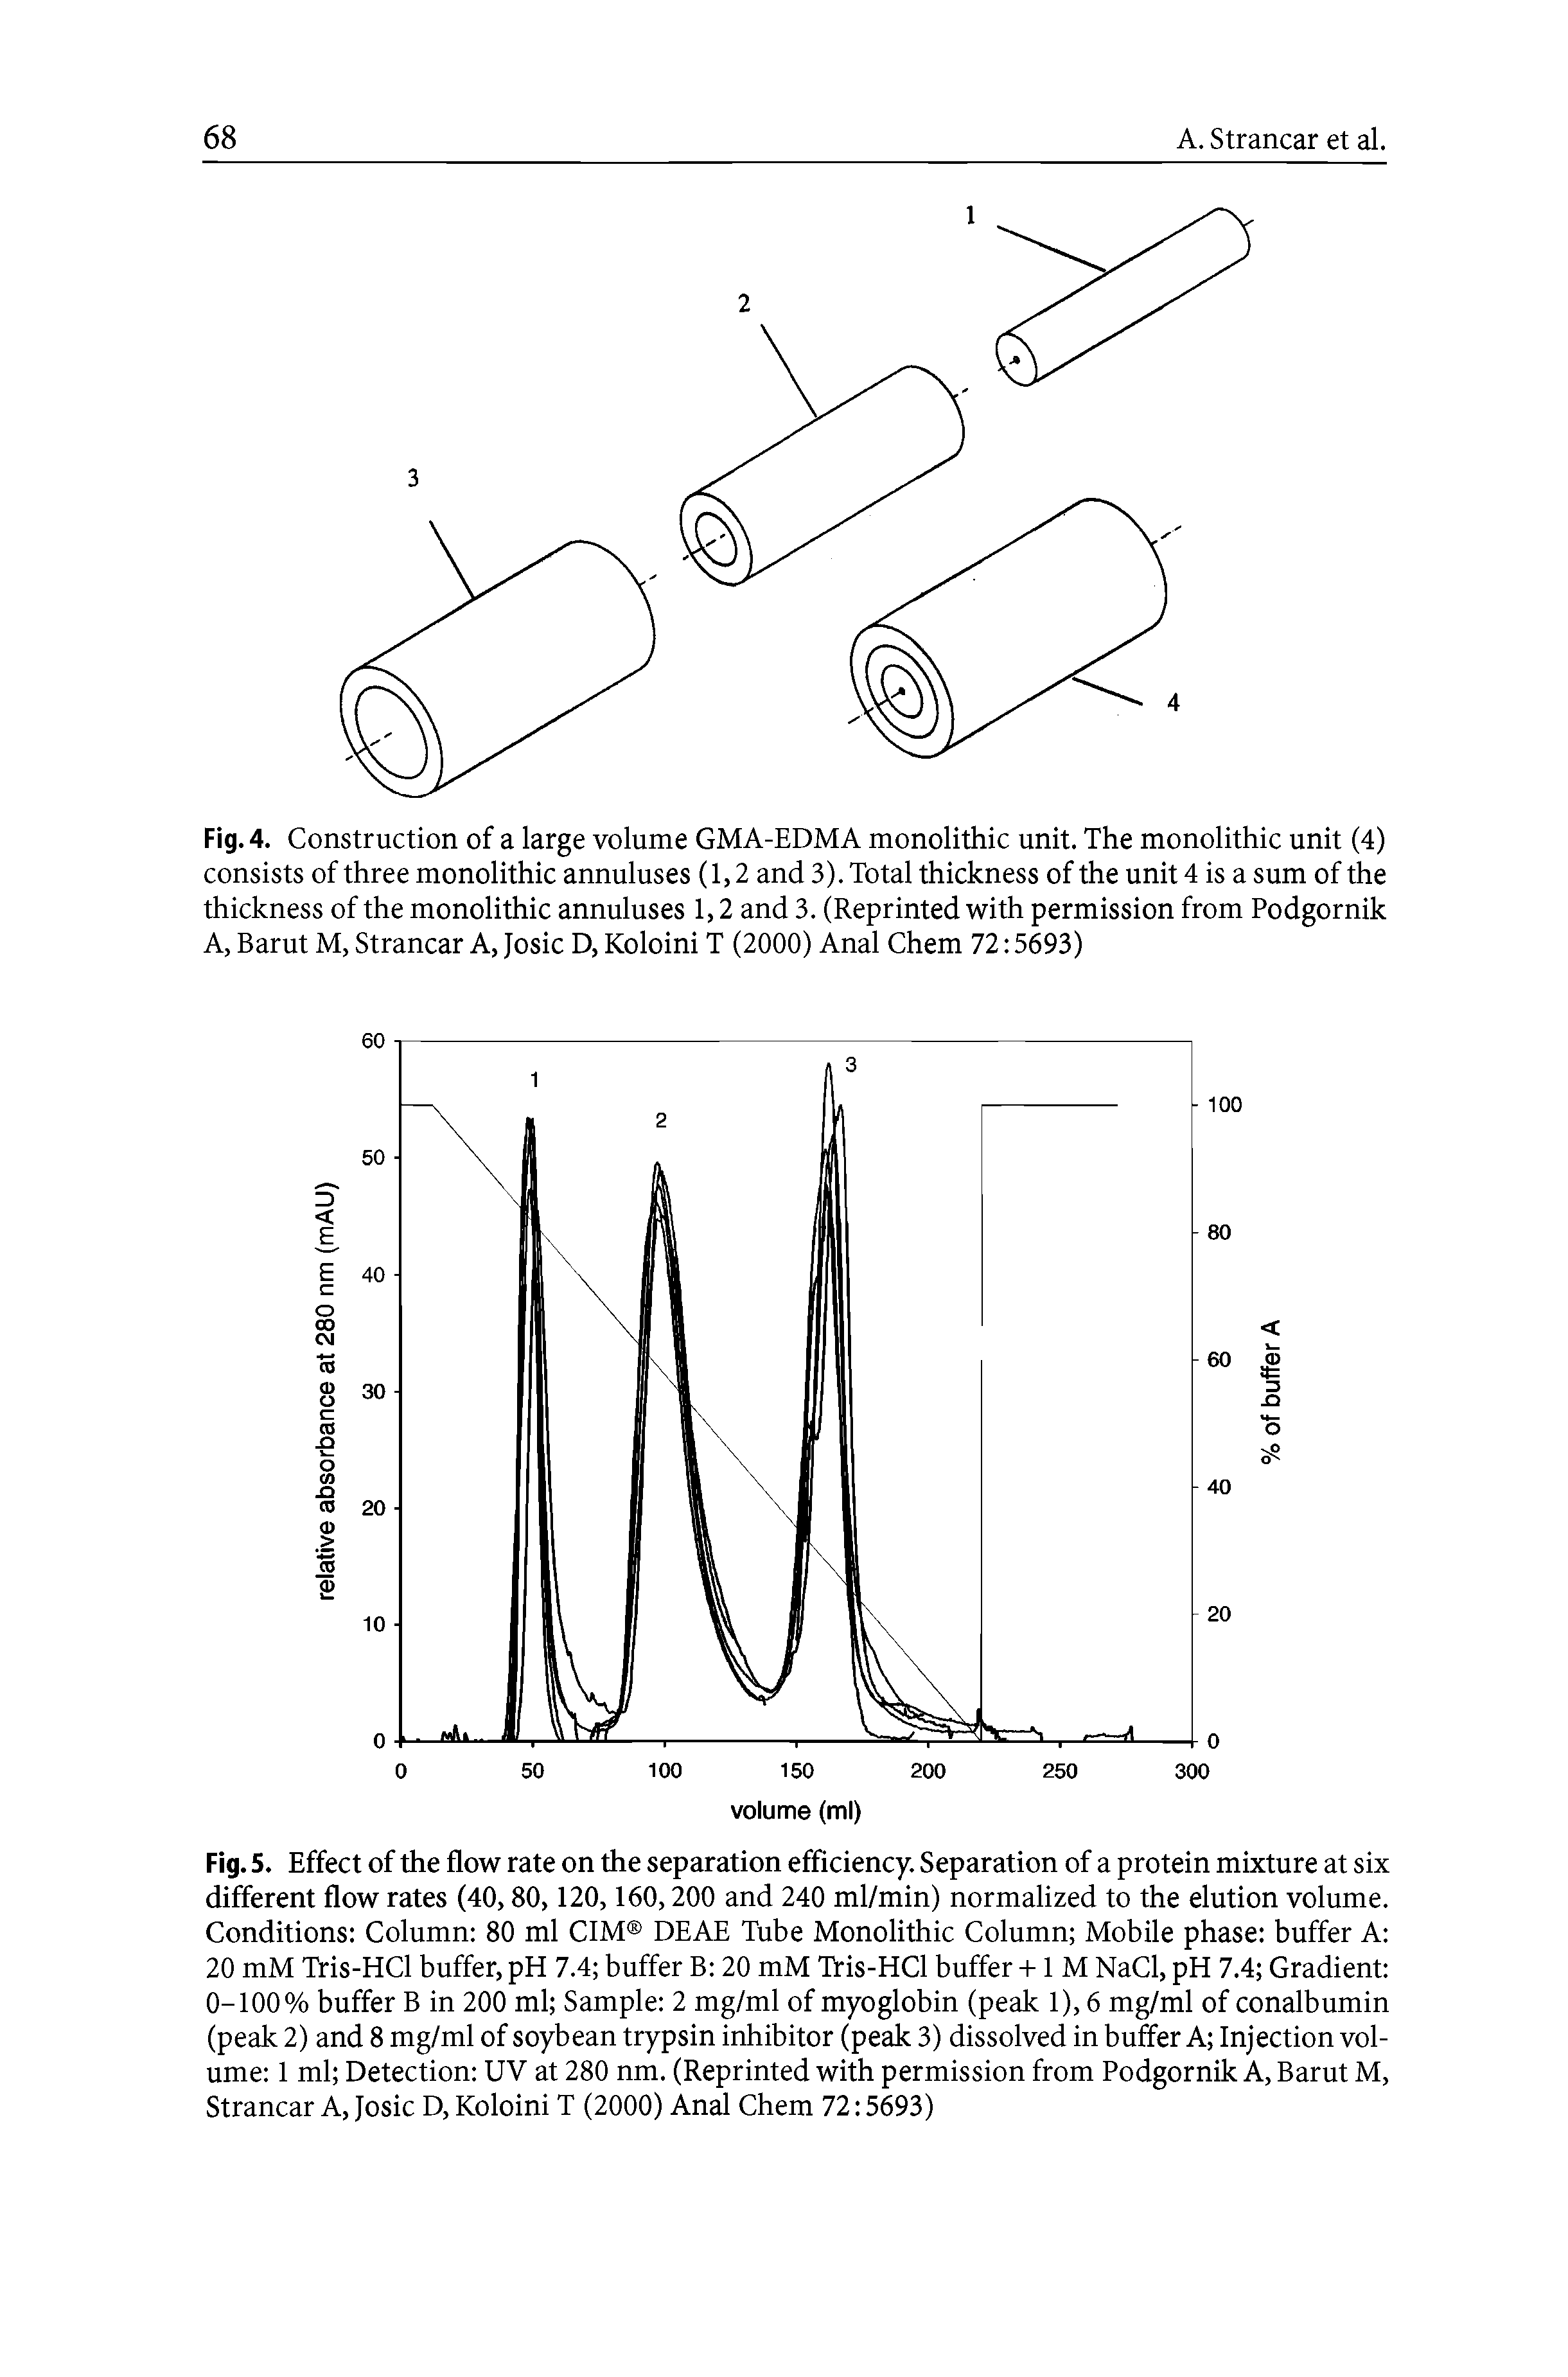 Fig. 5. Effect of the flow rate on the separation efficiency. Separation of a protein mixture at six different flow rates (40,80,120,160,200 and 240 ml/min) normalized to the elution volume. Conditions Column 80 ml CIM DEAE Tube Monolithic Column Mobile phase buffer A 20 mM Tris-HCl buffer, pH 7.4 buffer B 20 mM Tris-HCl buffer + 1 M NaCl, pH 7.4 Gradient 0-100% buffer B in 200 ml Sample 2 mg/ml of myoglobin (peak 1), 6 mg/ml of conalbumin (peak 2) and 8 mg/ml of soybean trypsin inhibitor (peak 3) dissolved in buffer A Injection volume 1 ml Detection UV at 280 nm. (Reprinted with permission from Podgornik A, Barut M, Strancar A, Josic D, Koloini T (2000) Anal Chem 72 5693)...